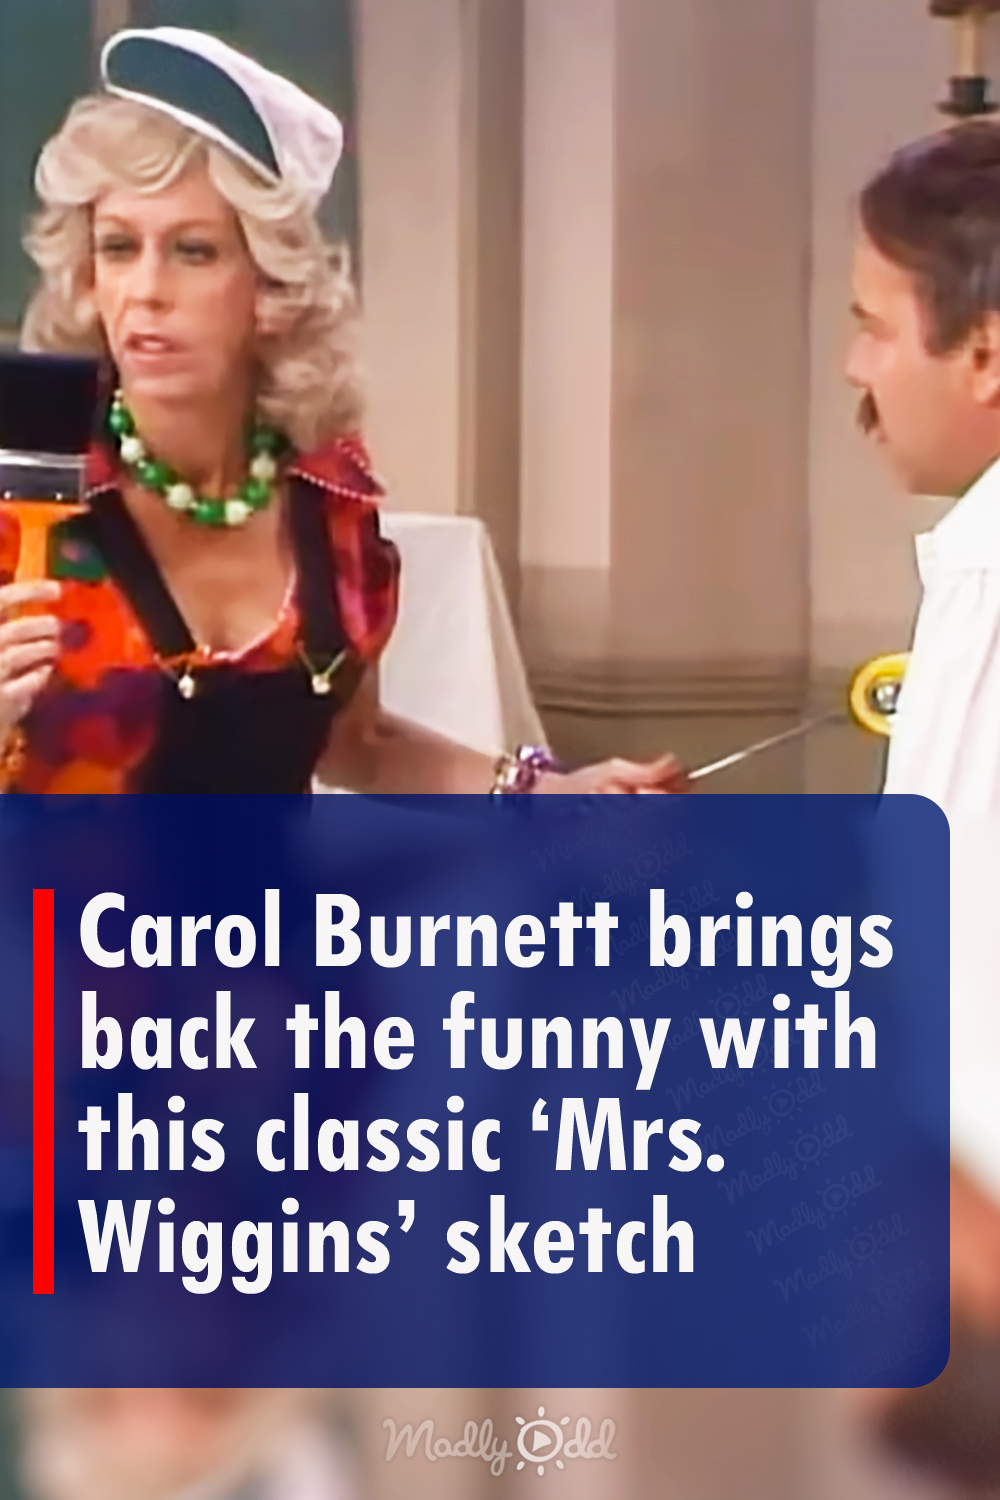 Carol Burnett brings back the funny with this classic \'Mrs. Wiggins\' sketch